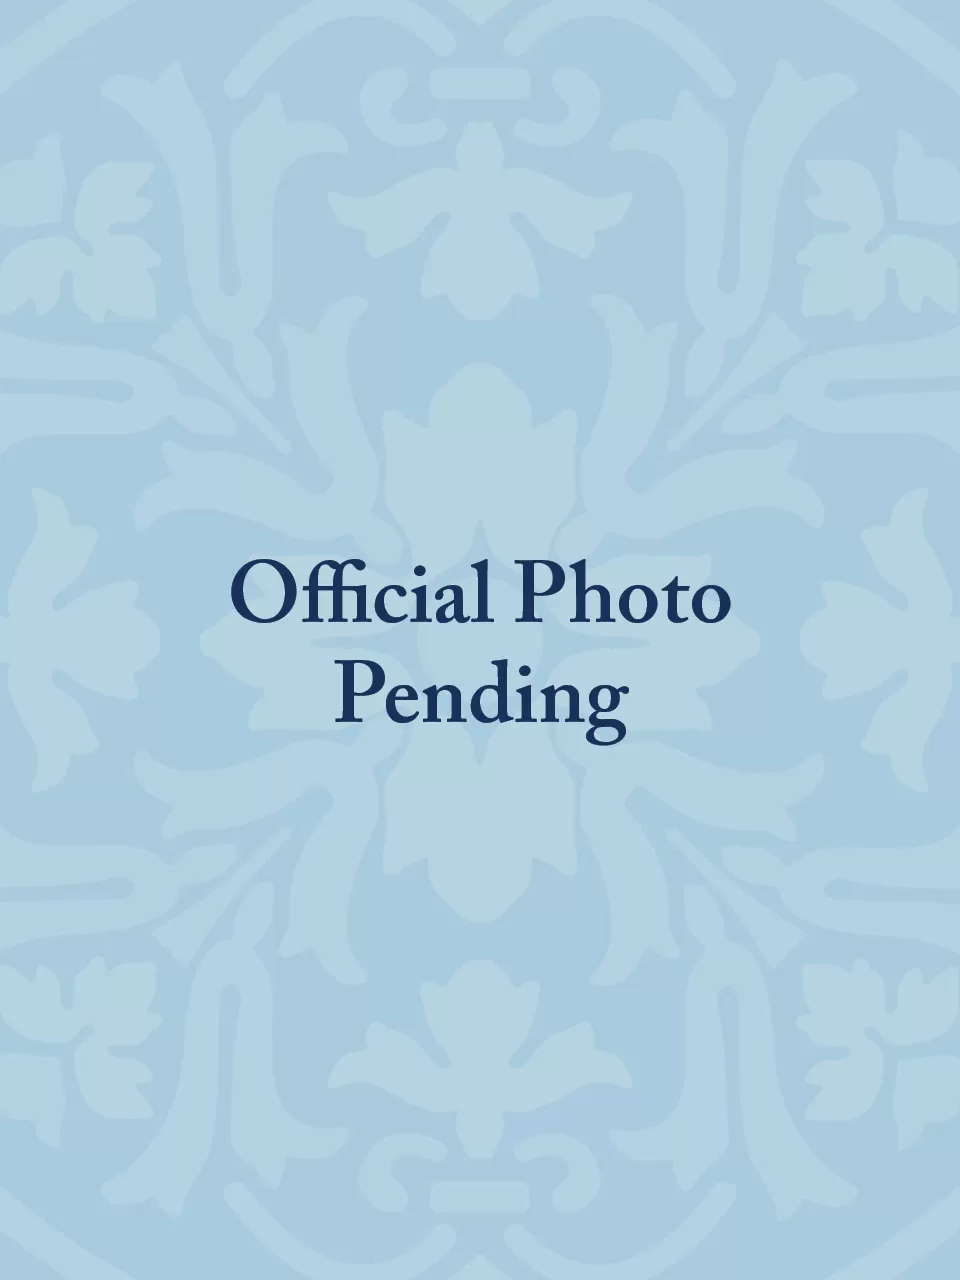 Official Photo Pending.